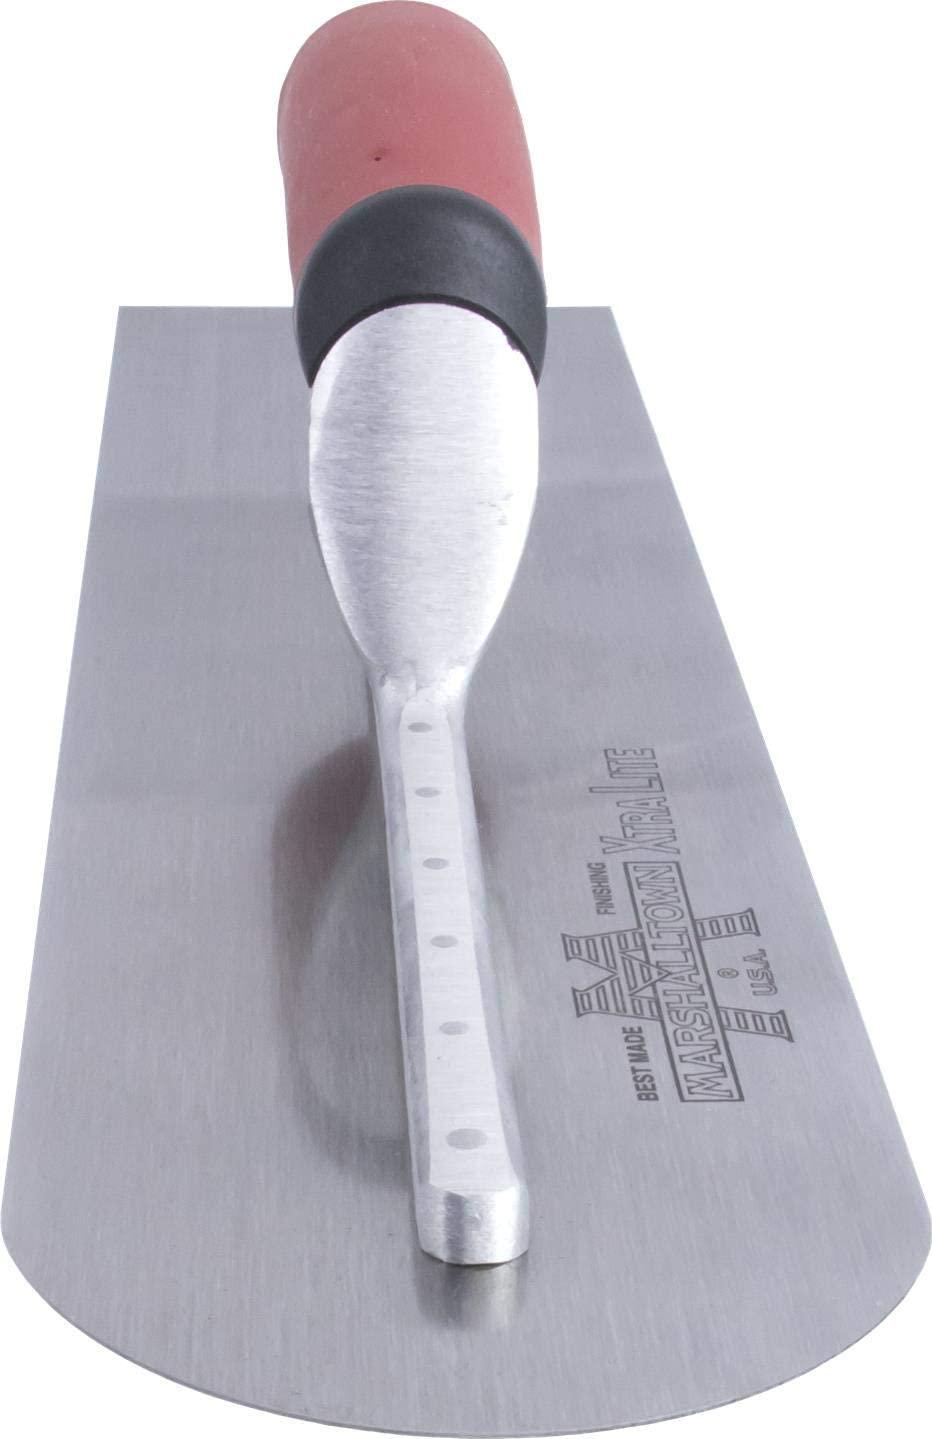 MARSHALLTOWN The Premier Line, MARSHALLTOWN The Premier Line MXS66RED 16-Inch by 4-Inch Rounded End Finishing Trowel with Curved DuraSoftHandle